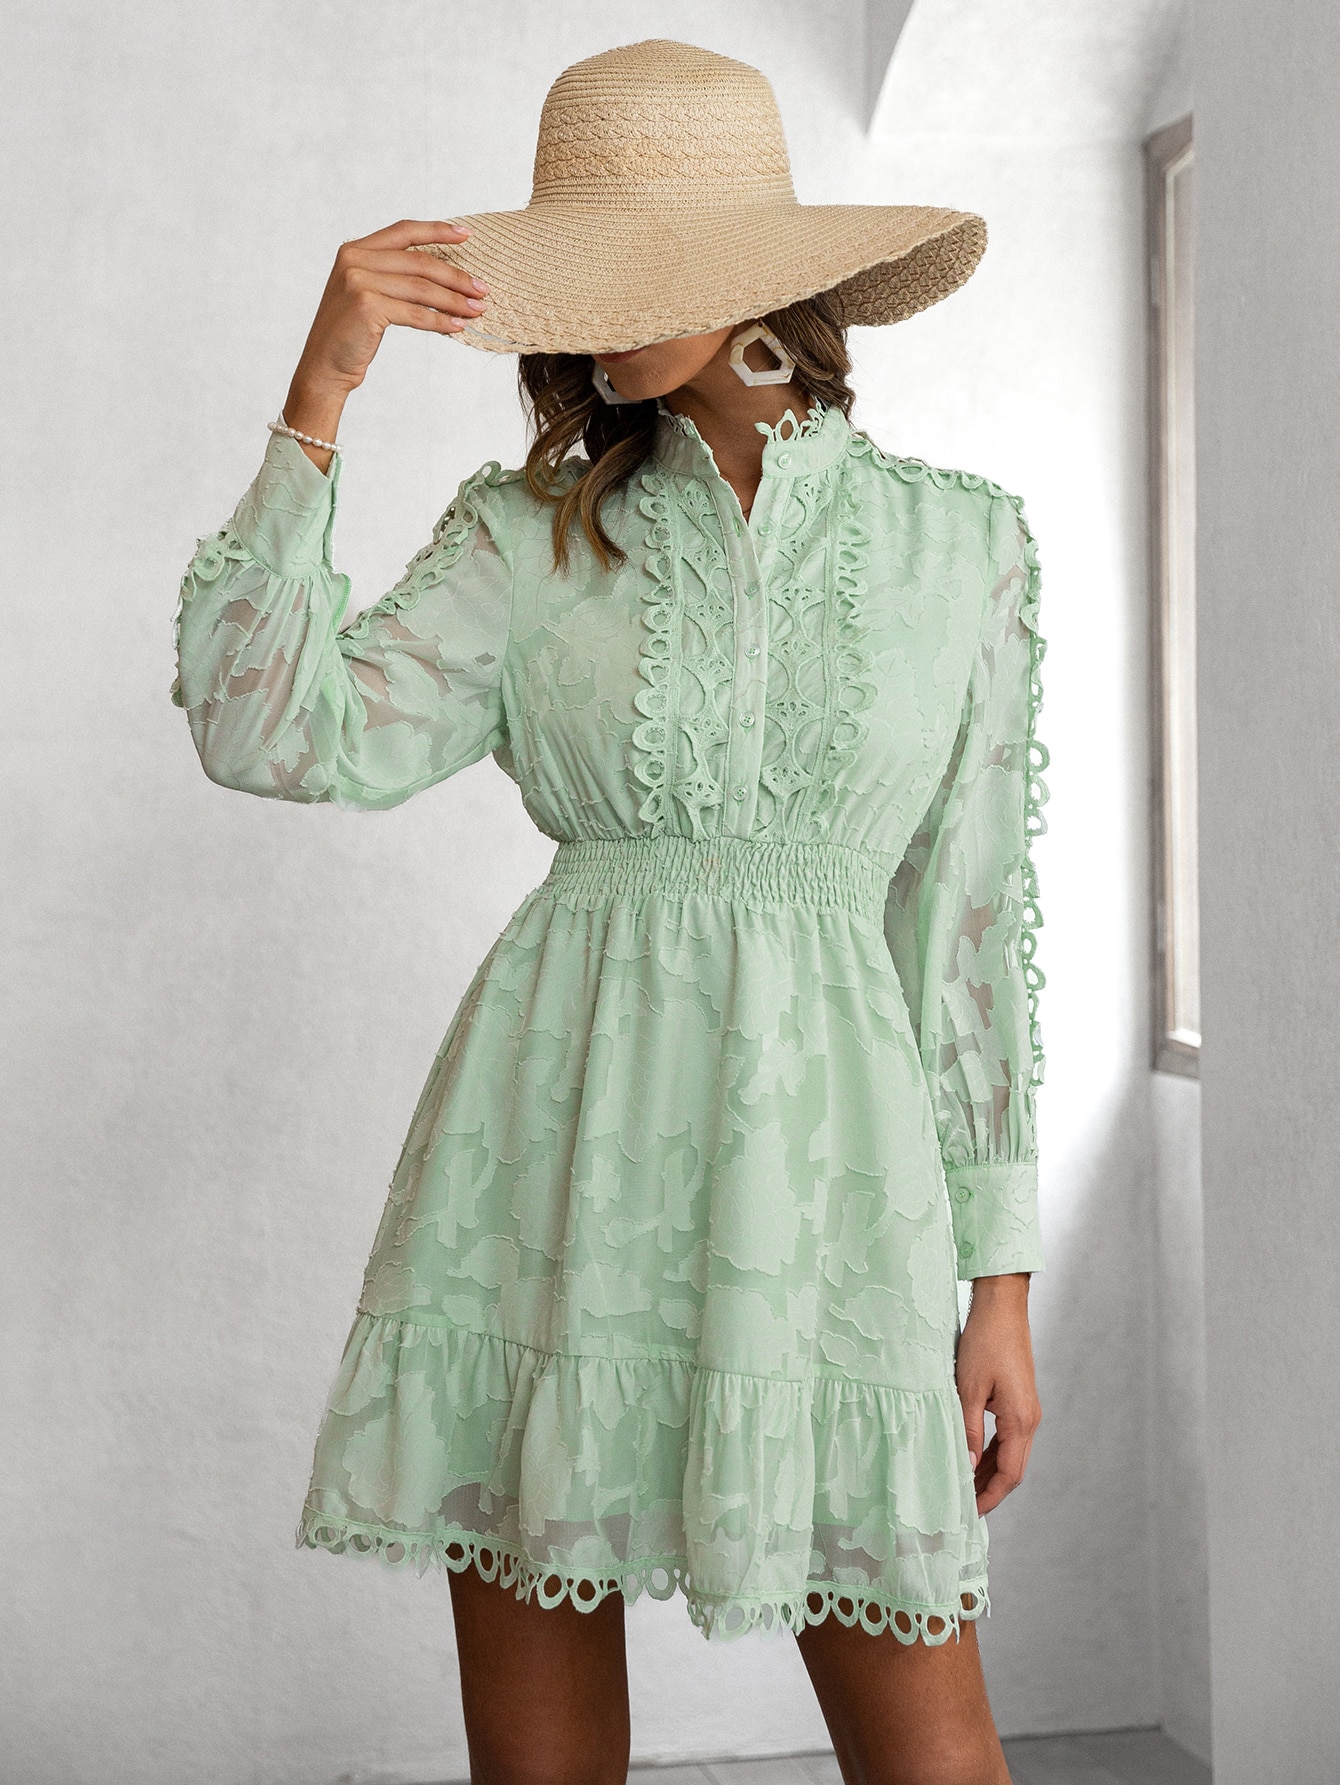 Simplee-Elegant-office-green-lace-dress-women-Summer-hollow-out-patchwork-buttons-mini-dresses-Long-sleeve-3